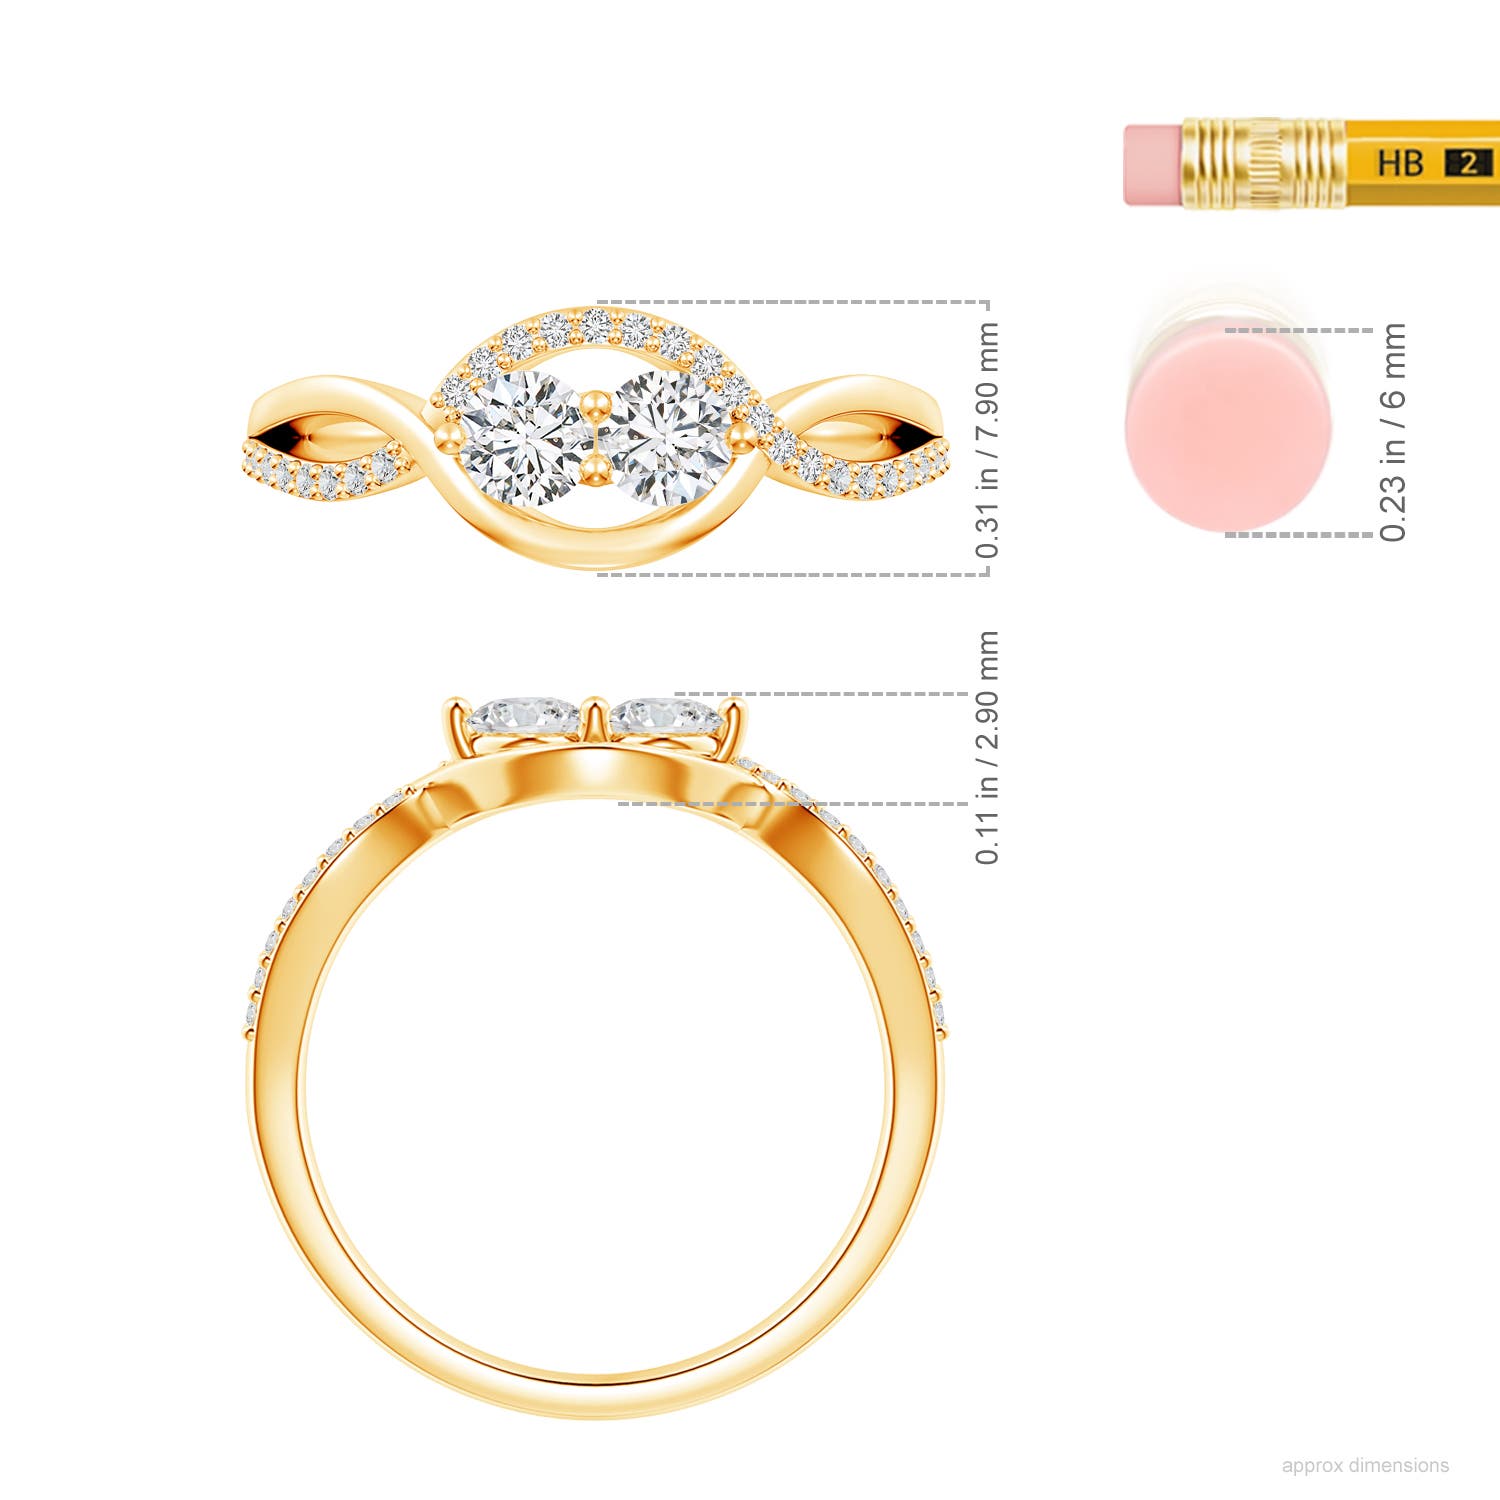 H, SI2 / 0.54 CT / 14 KT Yellow Gold